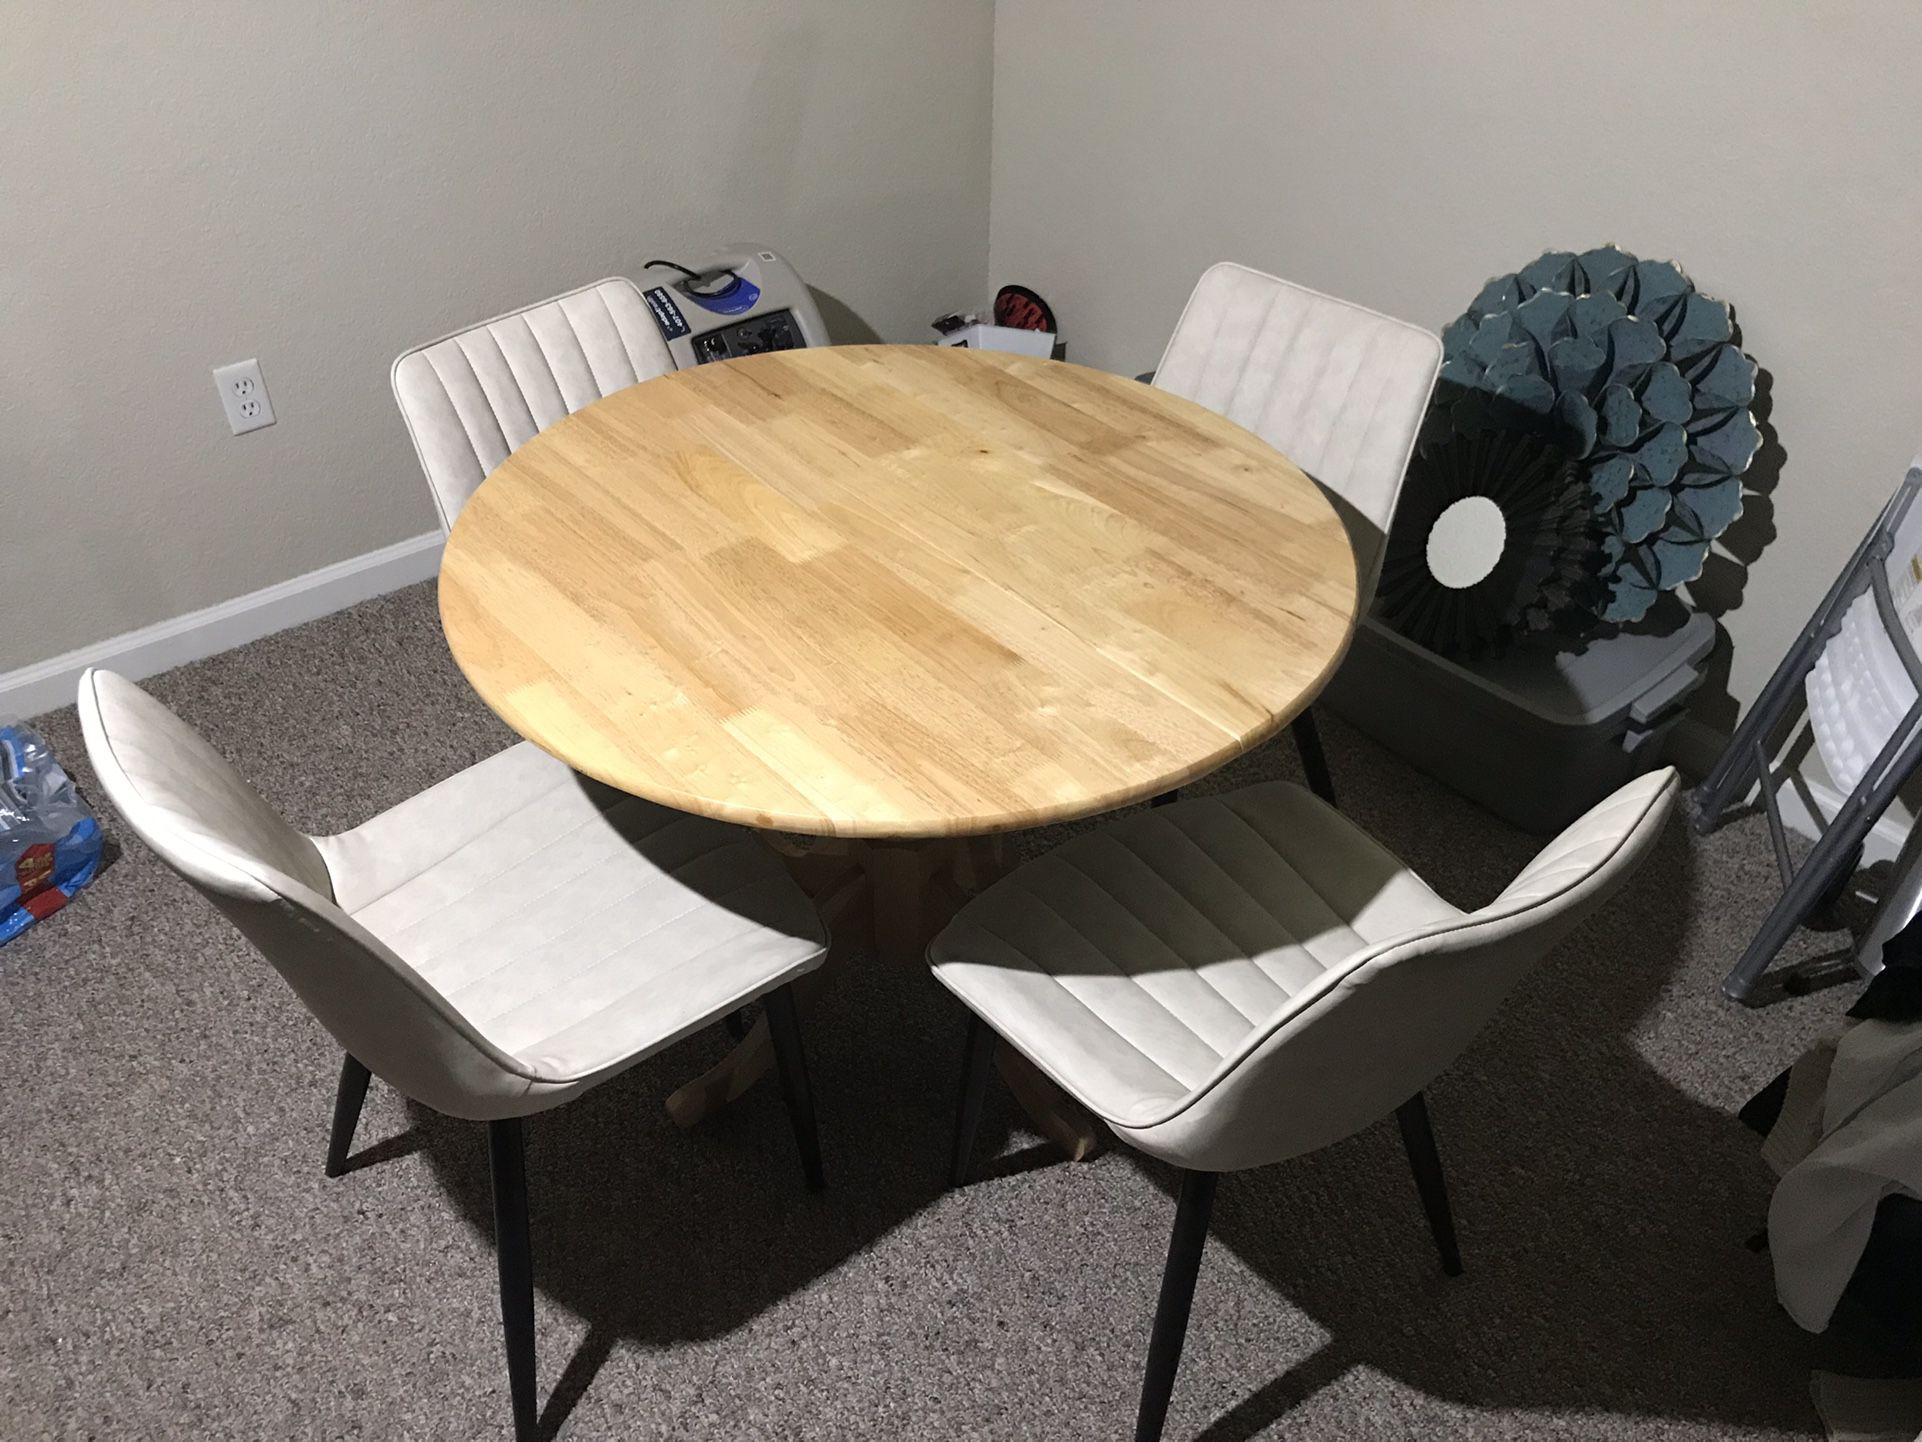 New Wood Kitchen Table w/4 Chairs